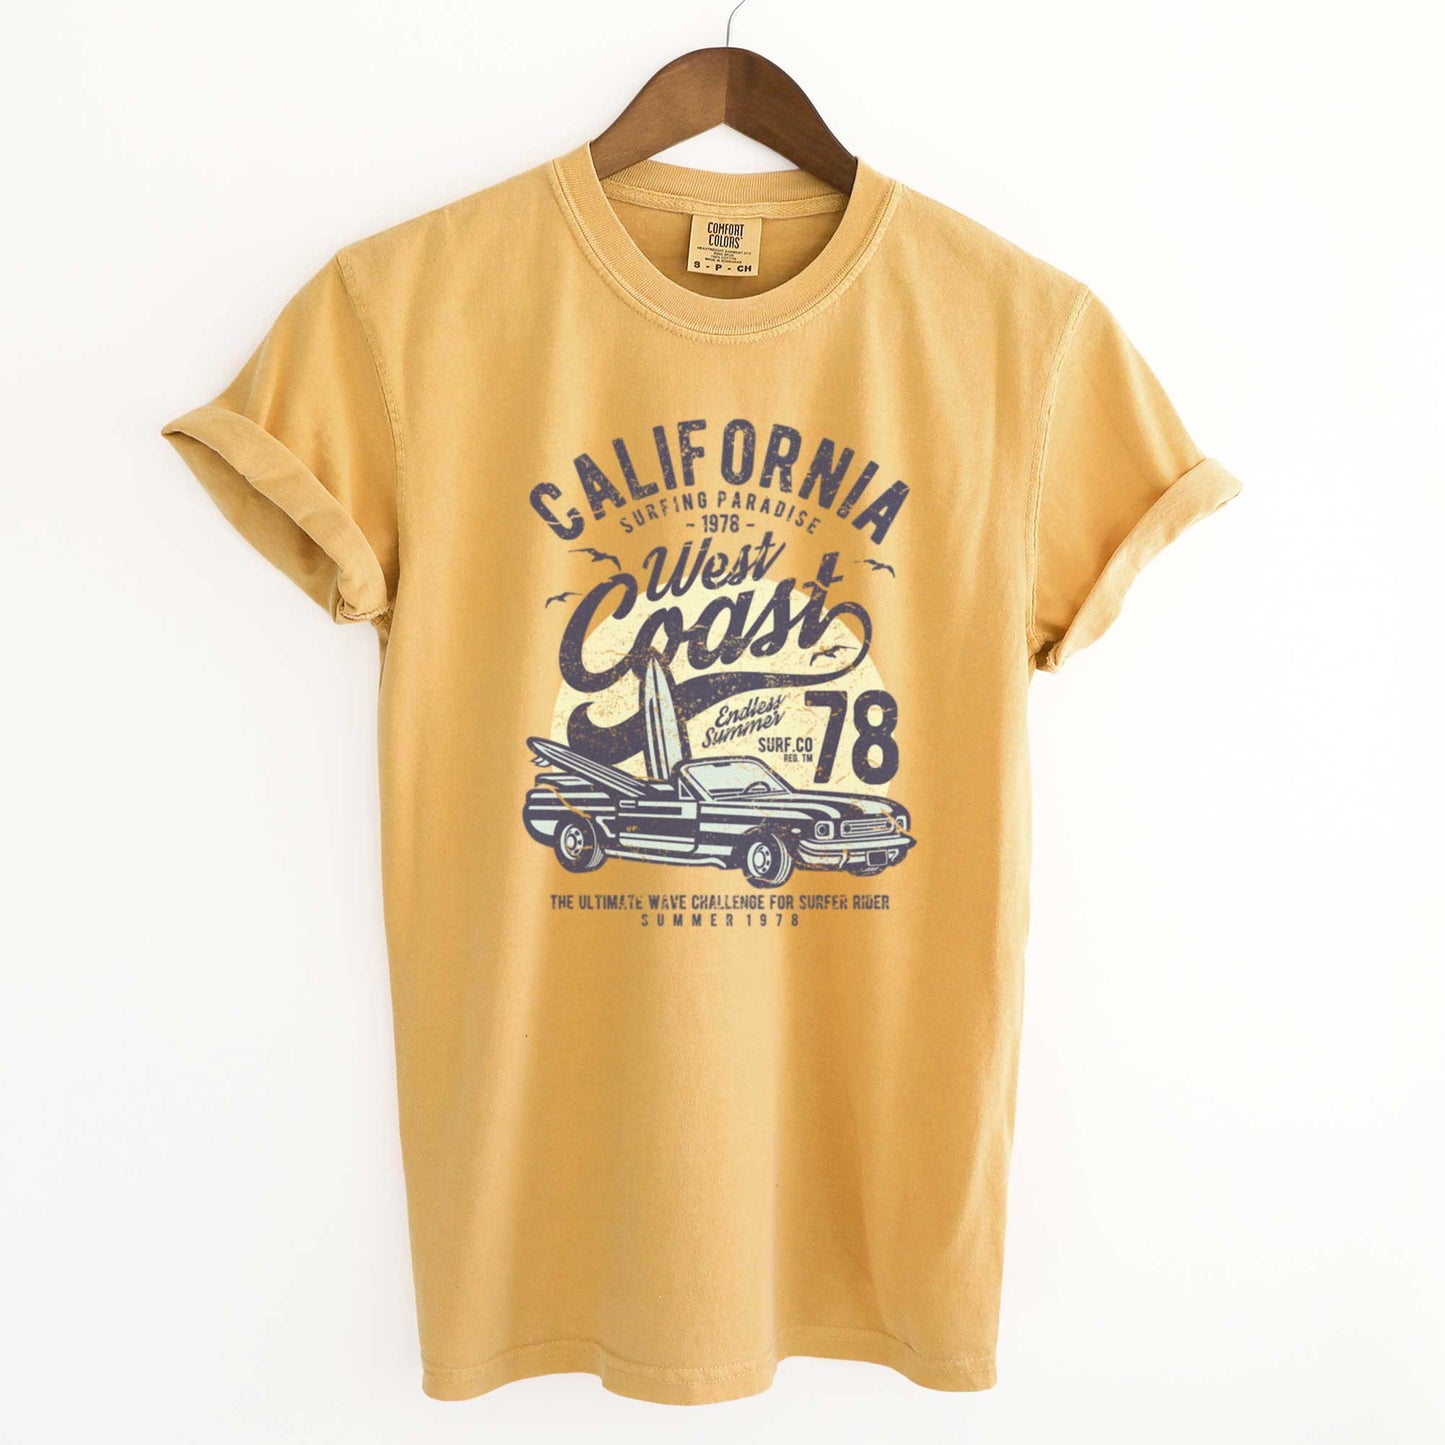 A hanging mustard yellow Comfort Colors t-shirt with surfboards inside a convertible and the words California west coast surfing paradise